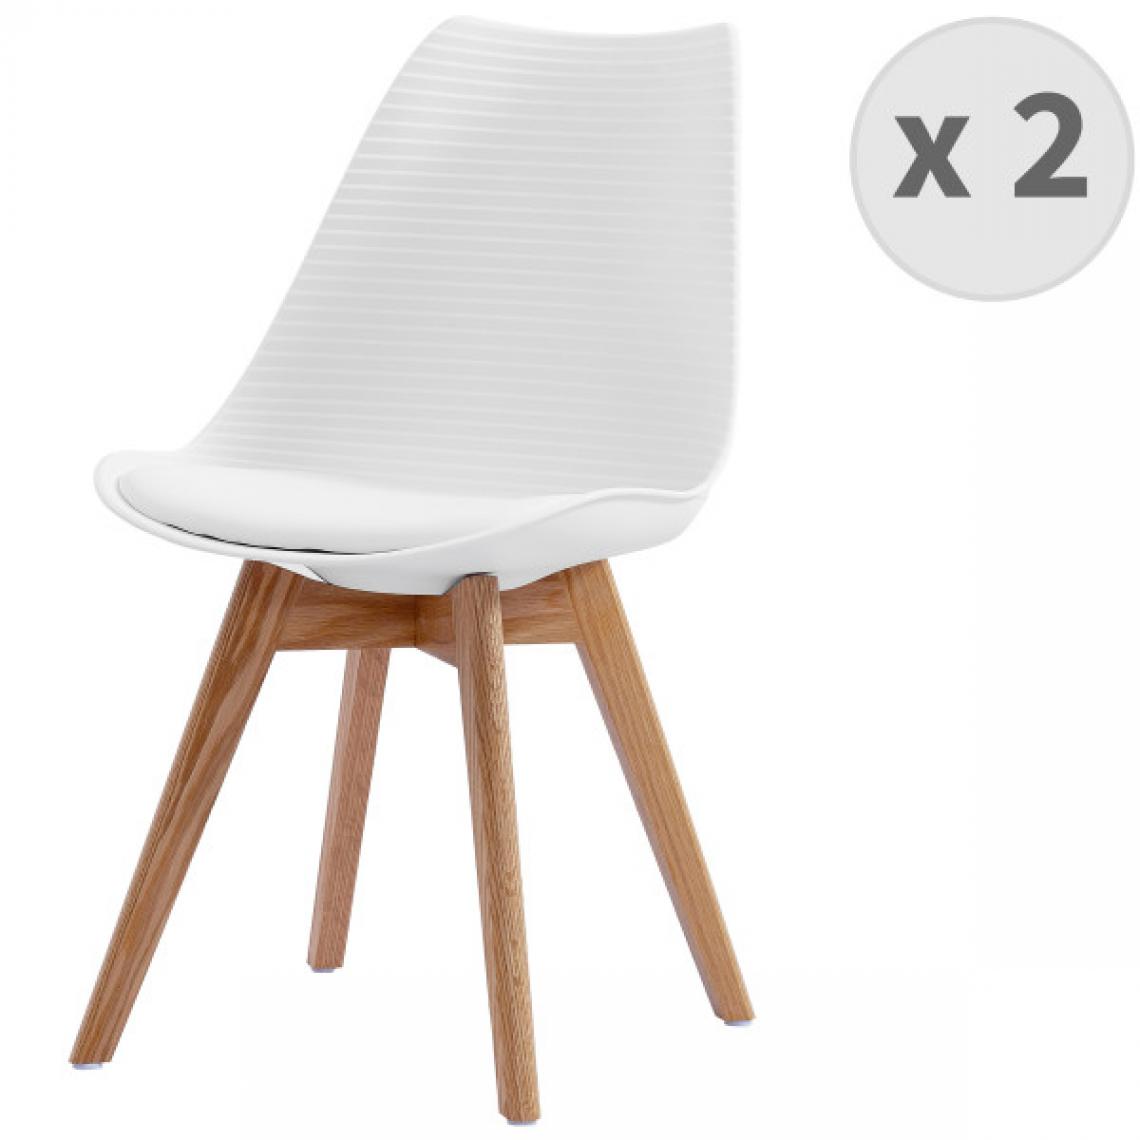 Moloo - BESSY-Chaise scandinave blanc pieds chêne (x2) - Chaises